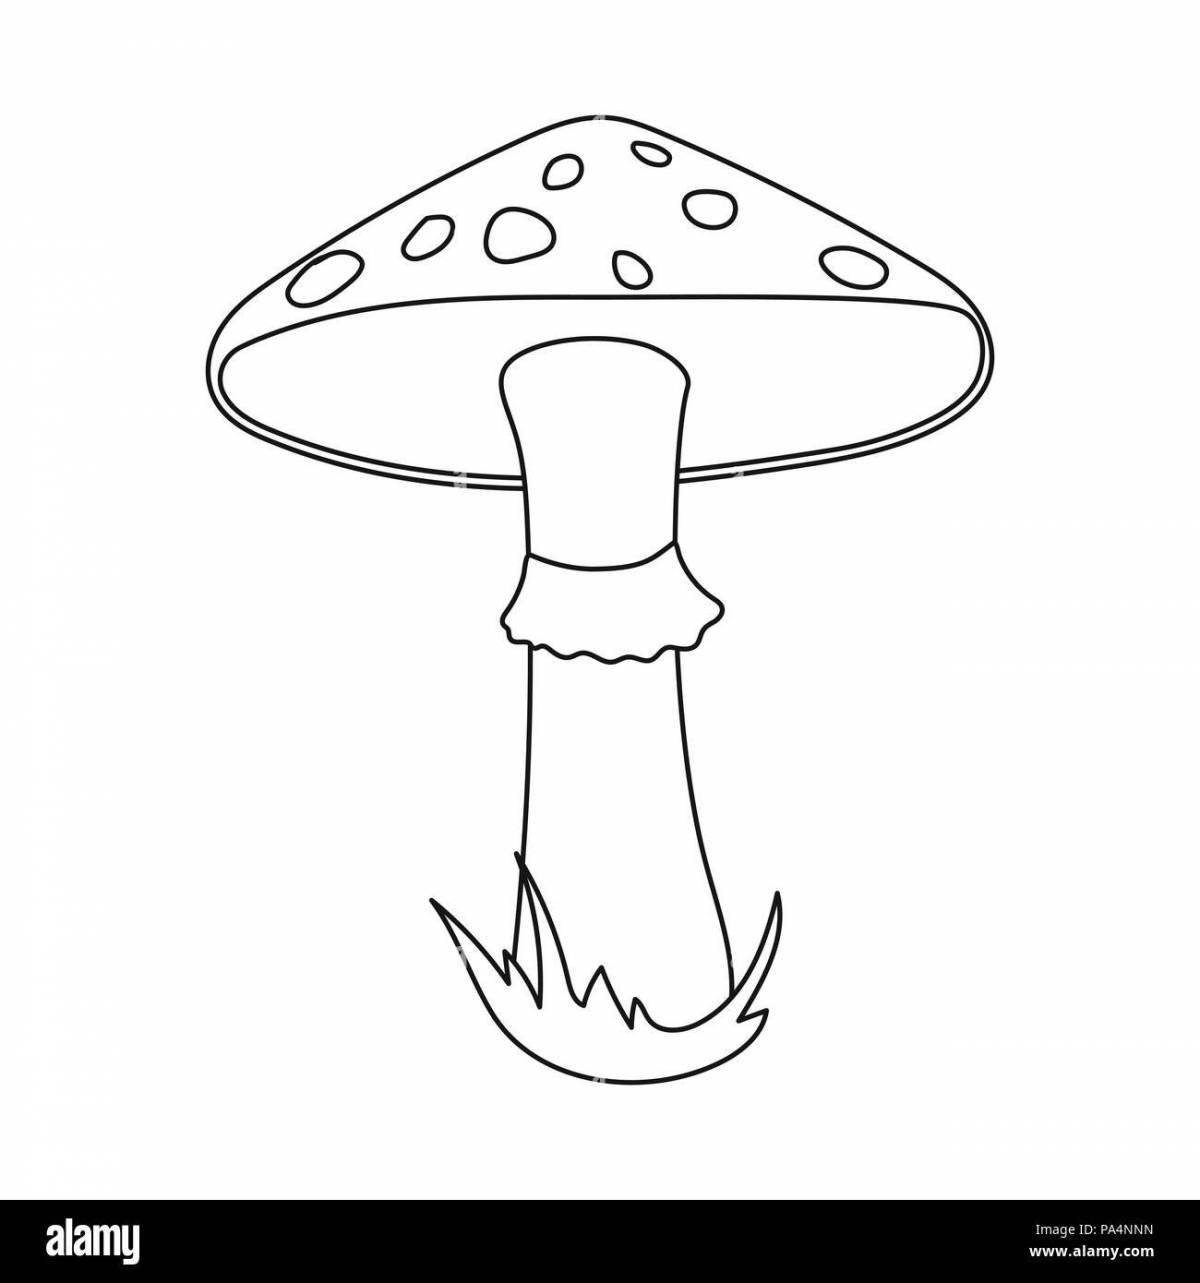 Coloring fairy toadstool